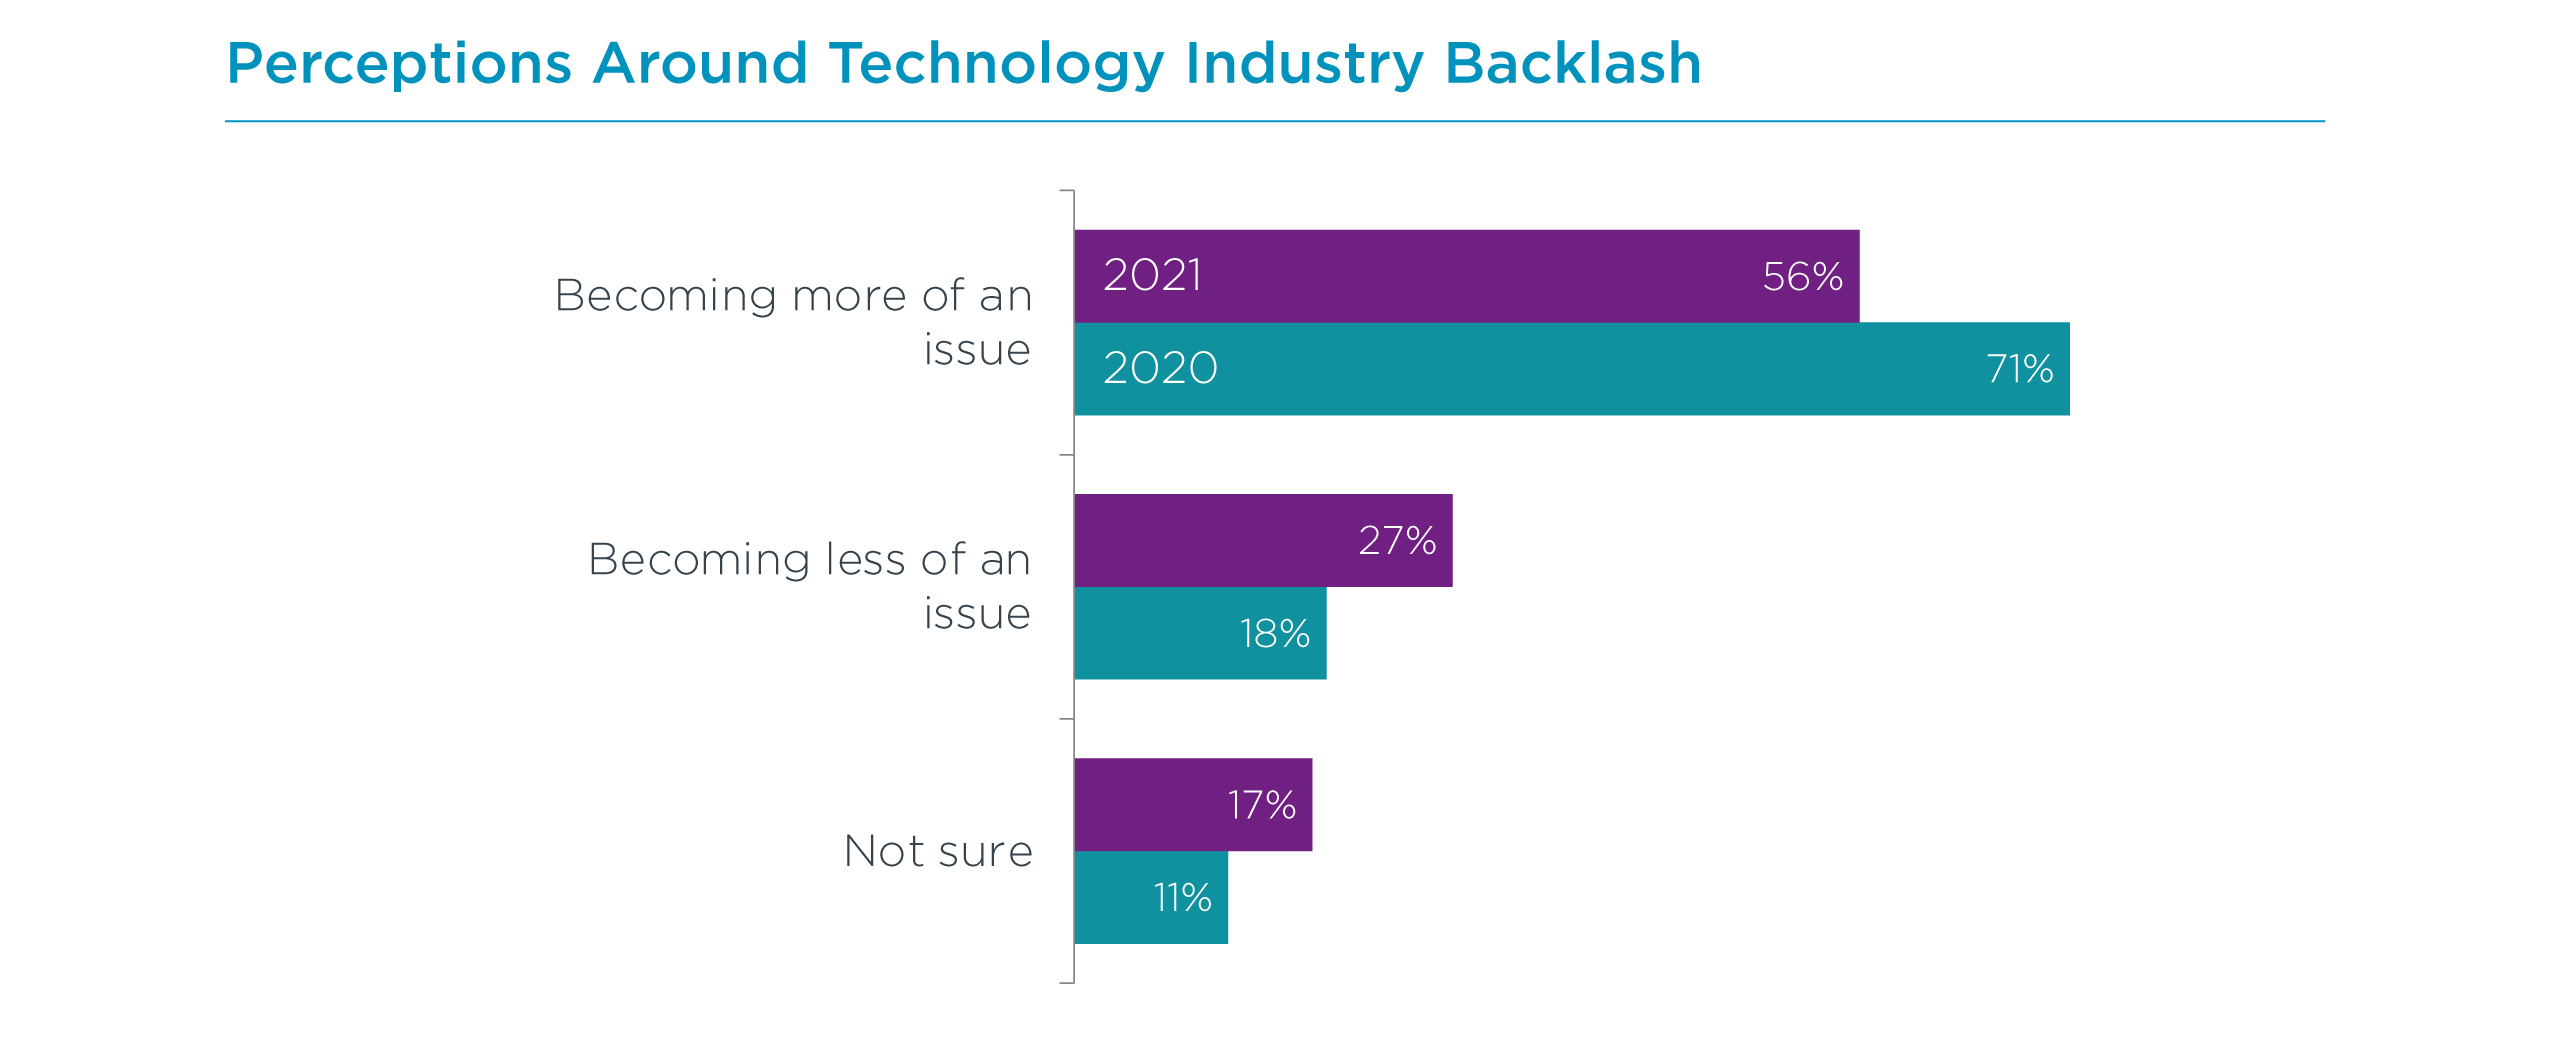 Perceptions Around Technology Industry Backlash